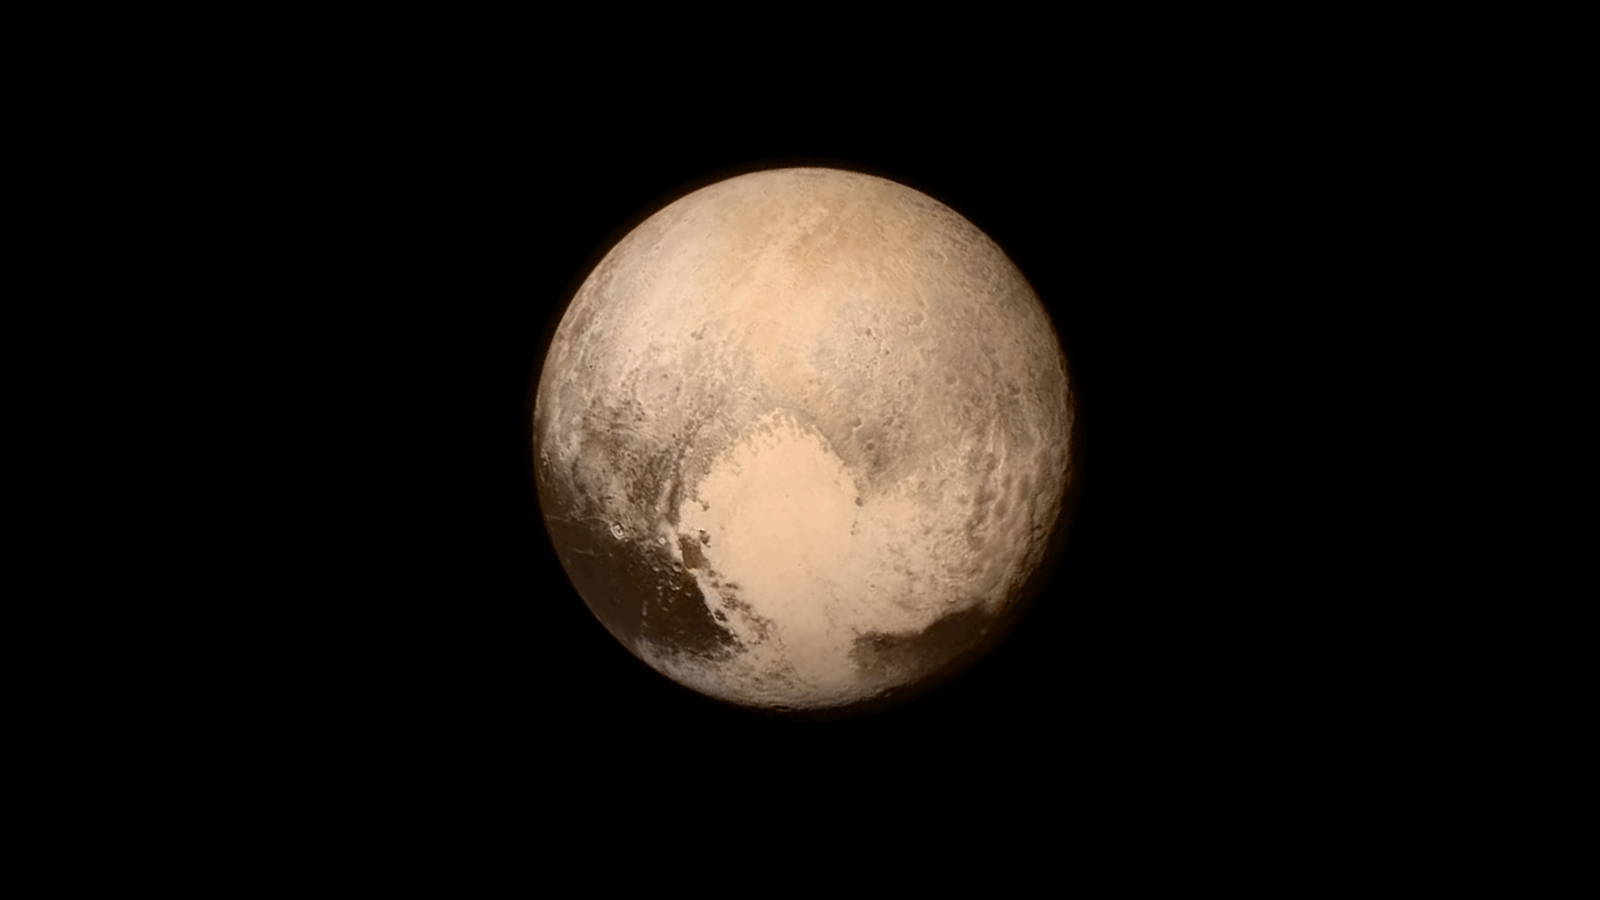 20-facts-about-pluto-dwarf-planet-mysteries